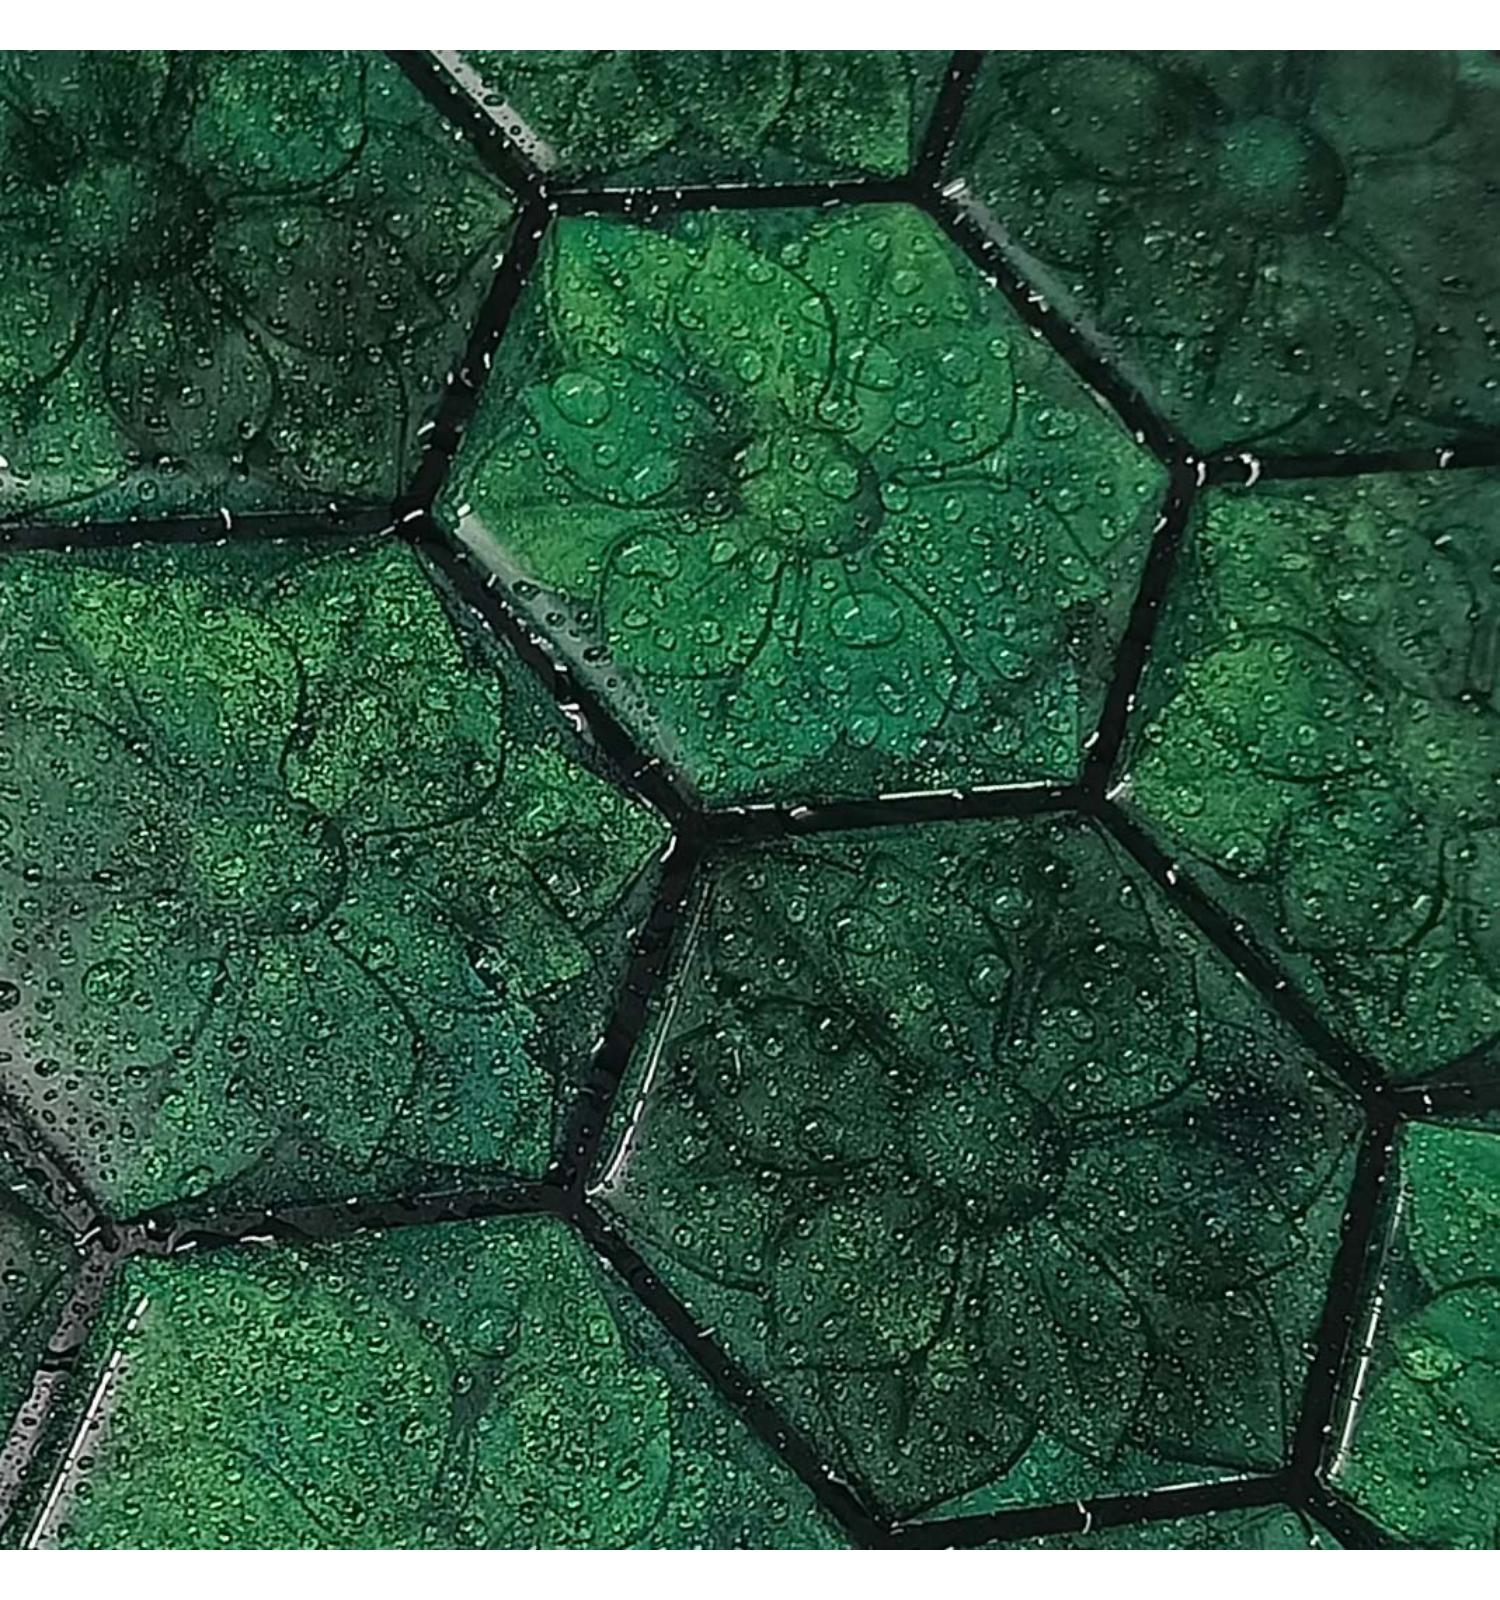 Forest Green peel and Stick Wall Tile | Hexagon Kitchen Backsplash Tiles | self Adhesive Tiles for Home Décor from Mosaicowall